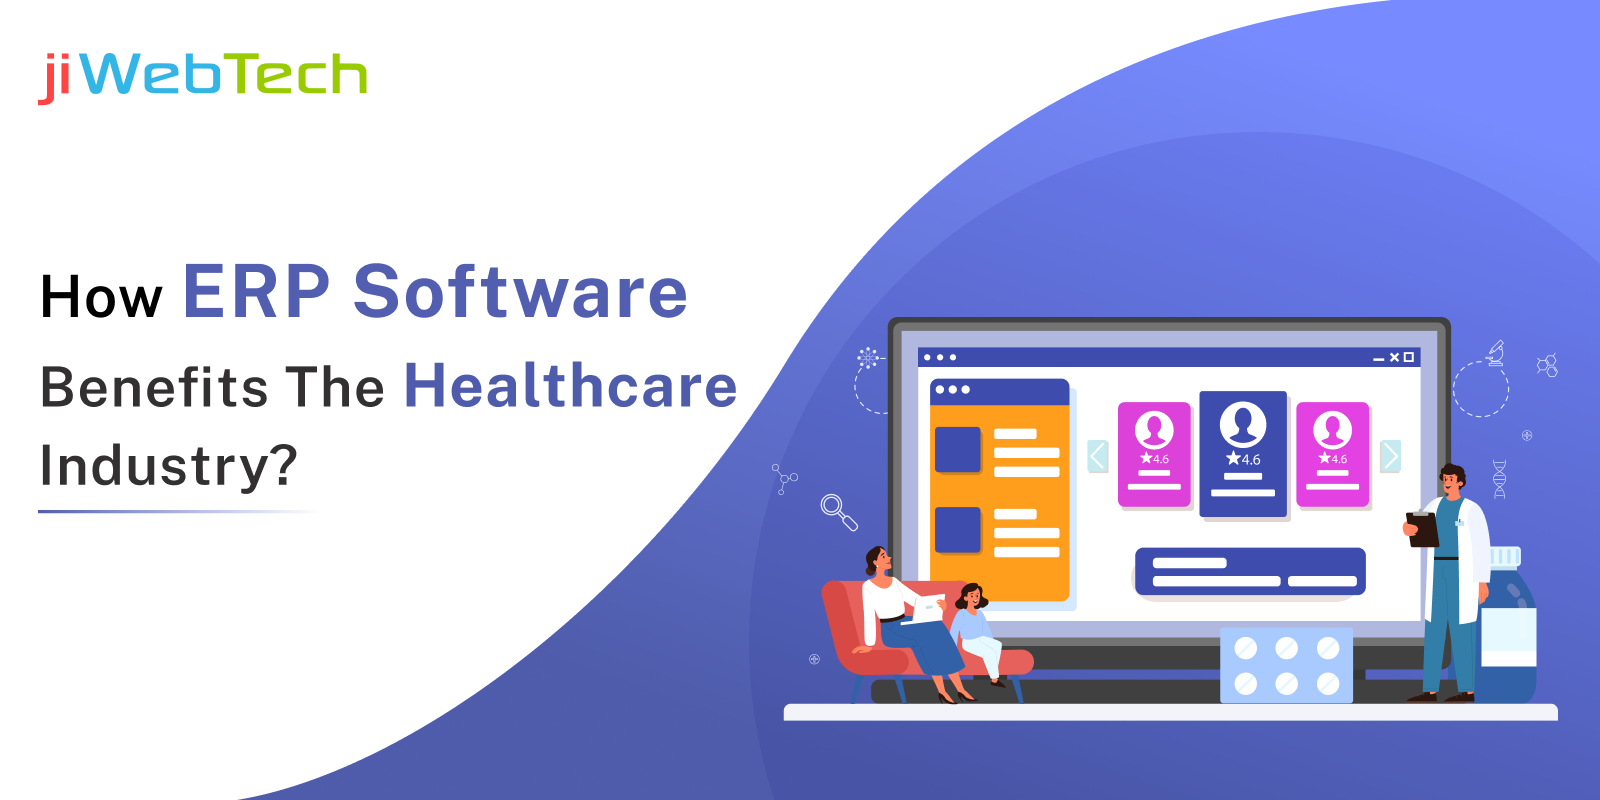 How ERP Software Benefits the Healthcare Industry?